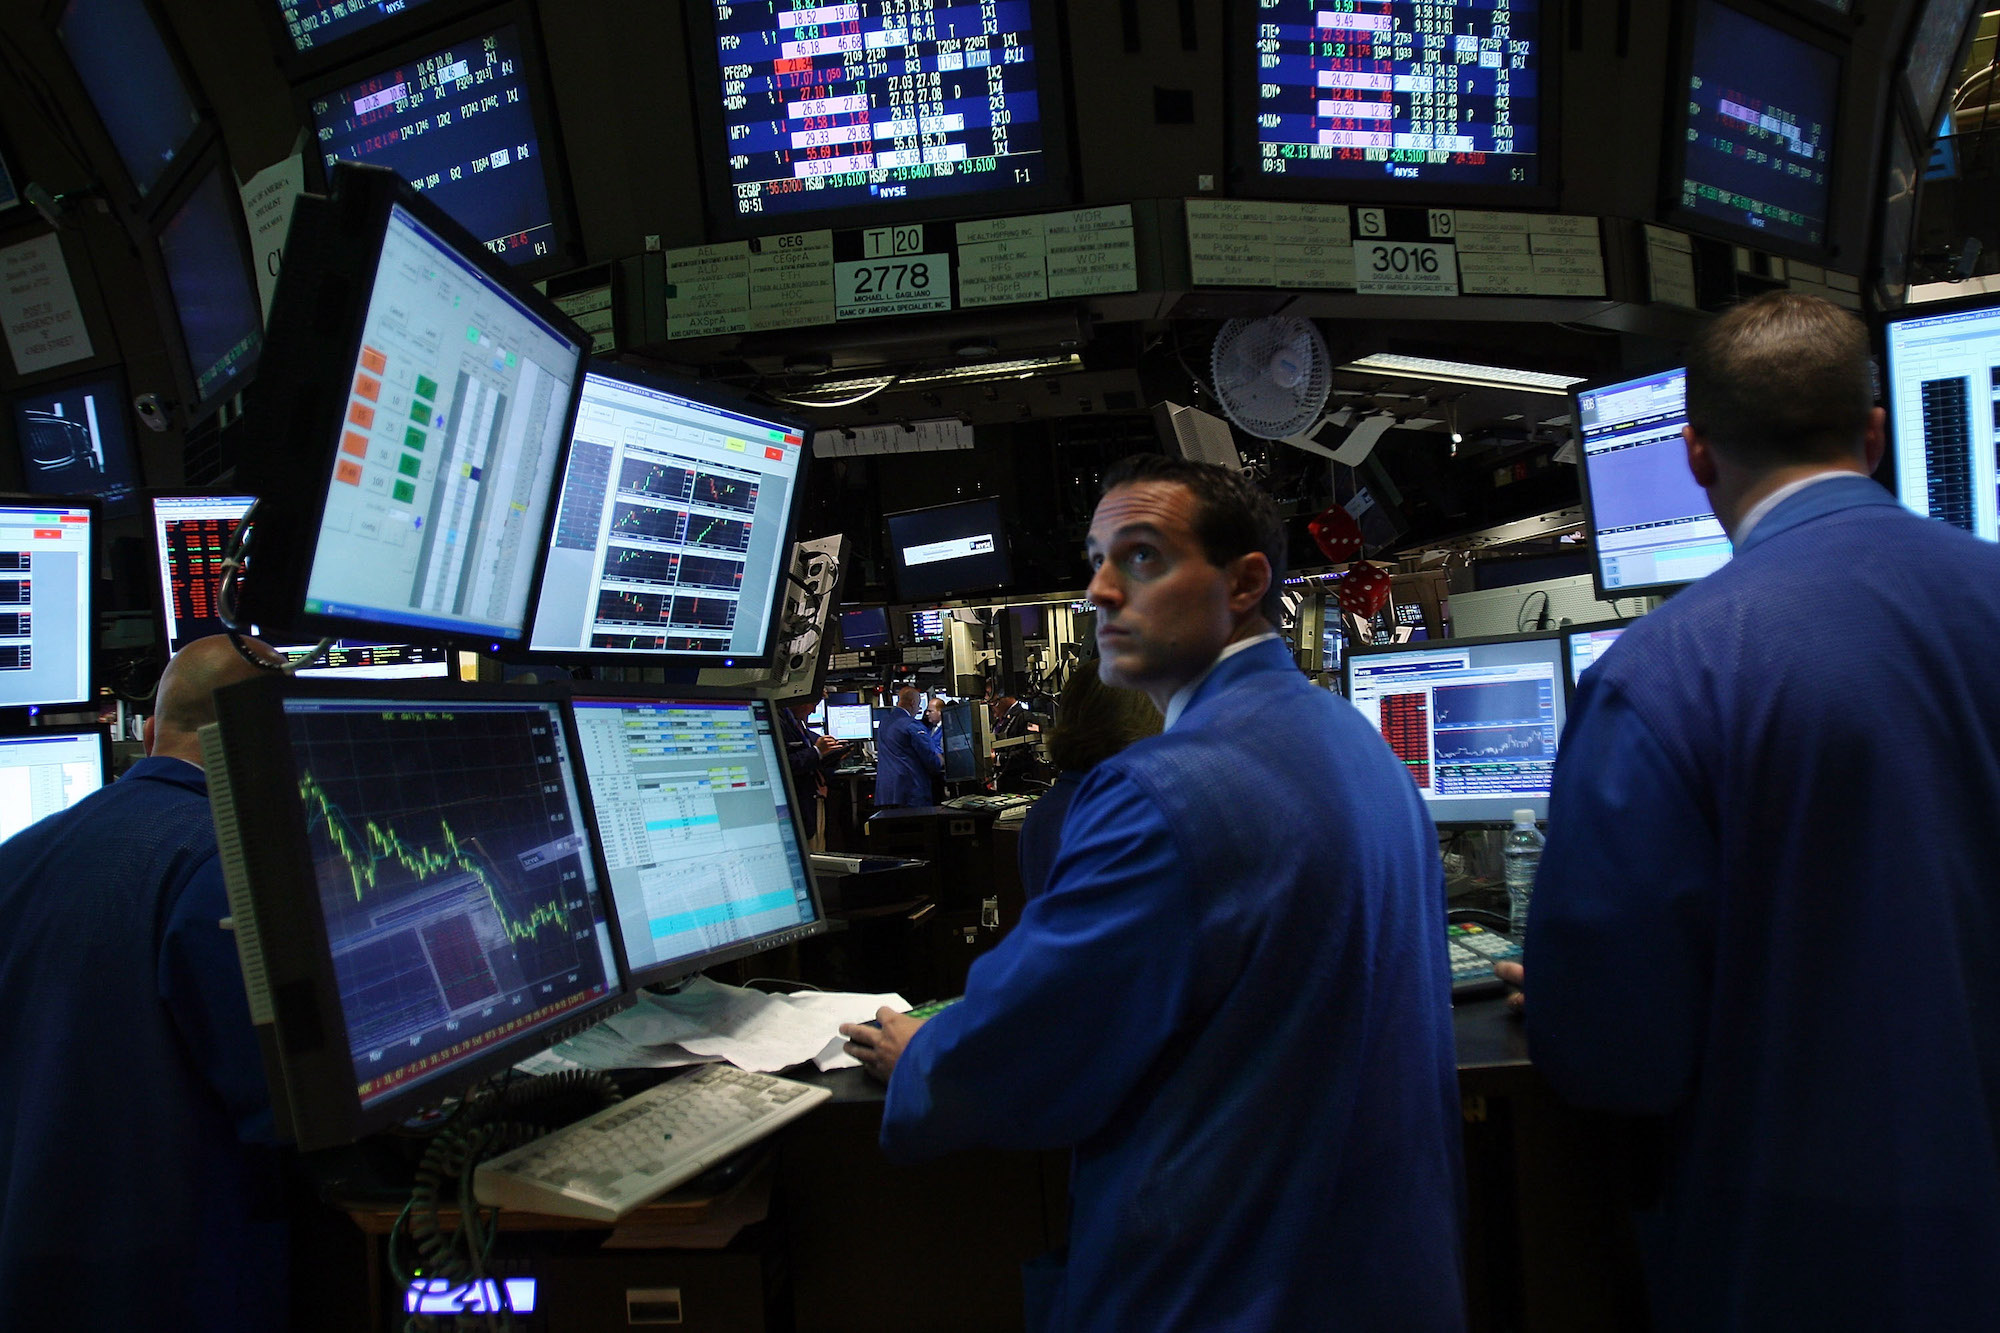 Traders work on the floor of the New York Stock Exchange on September 15, 2008.